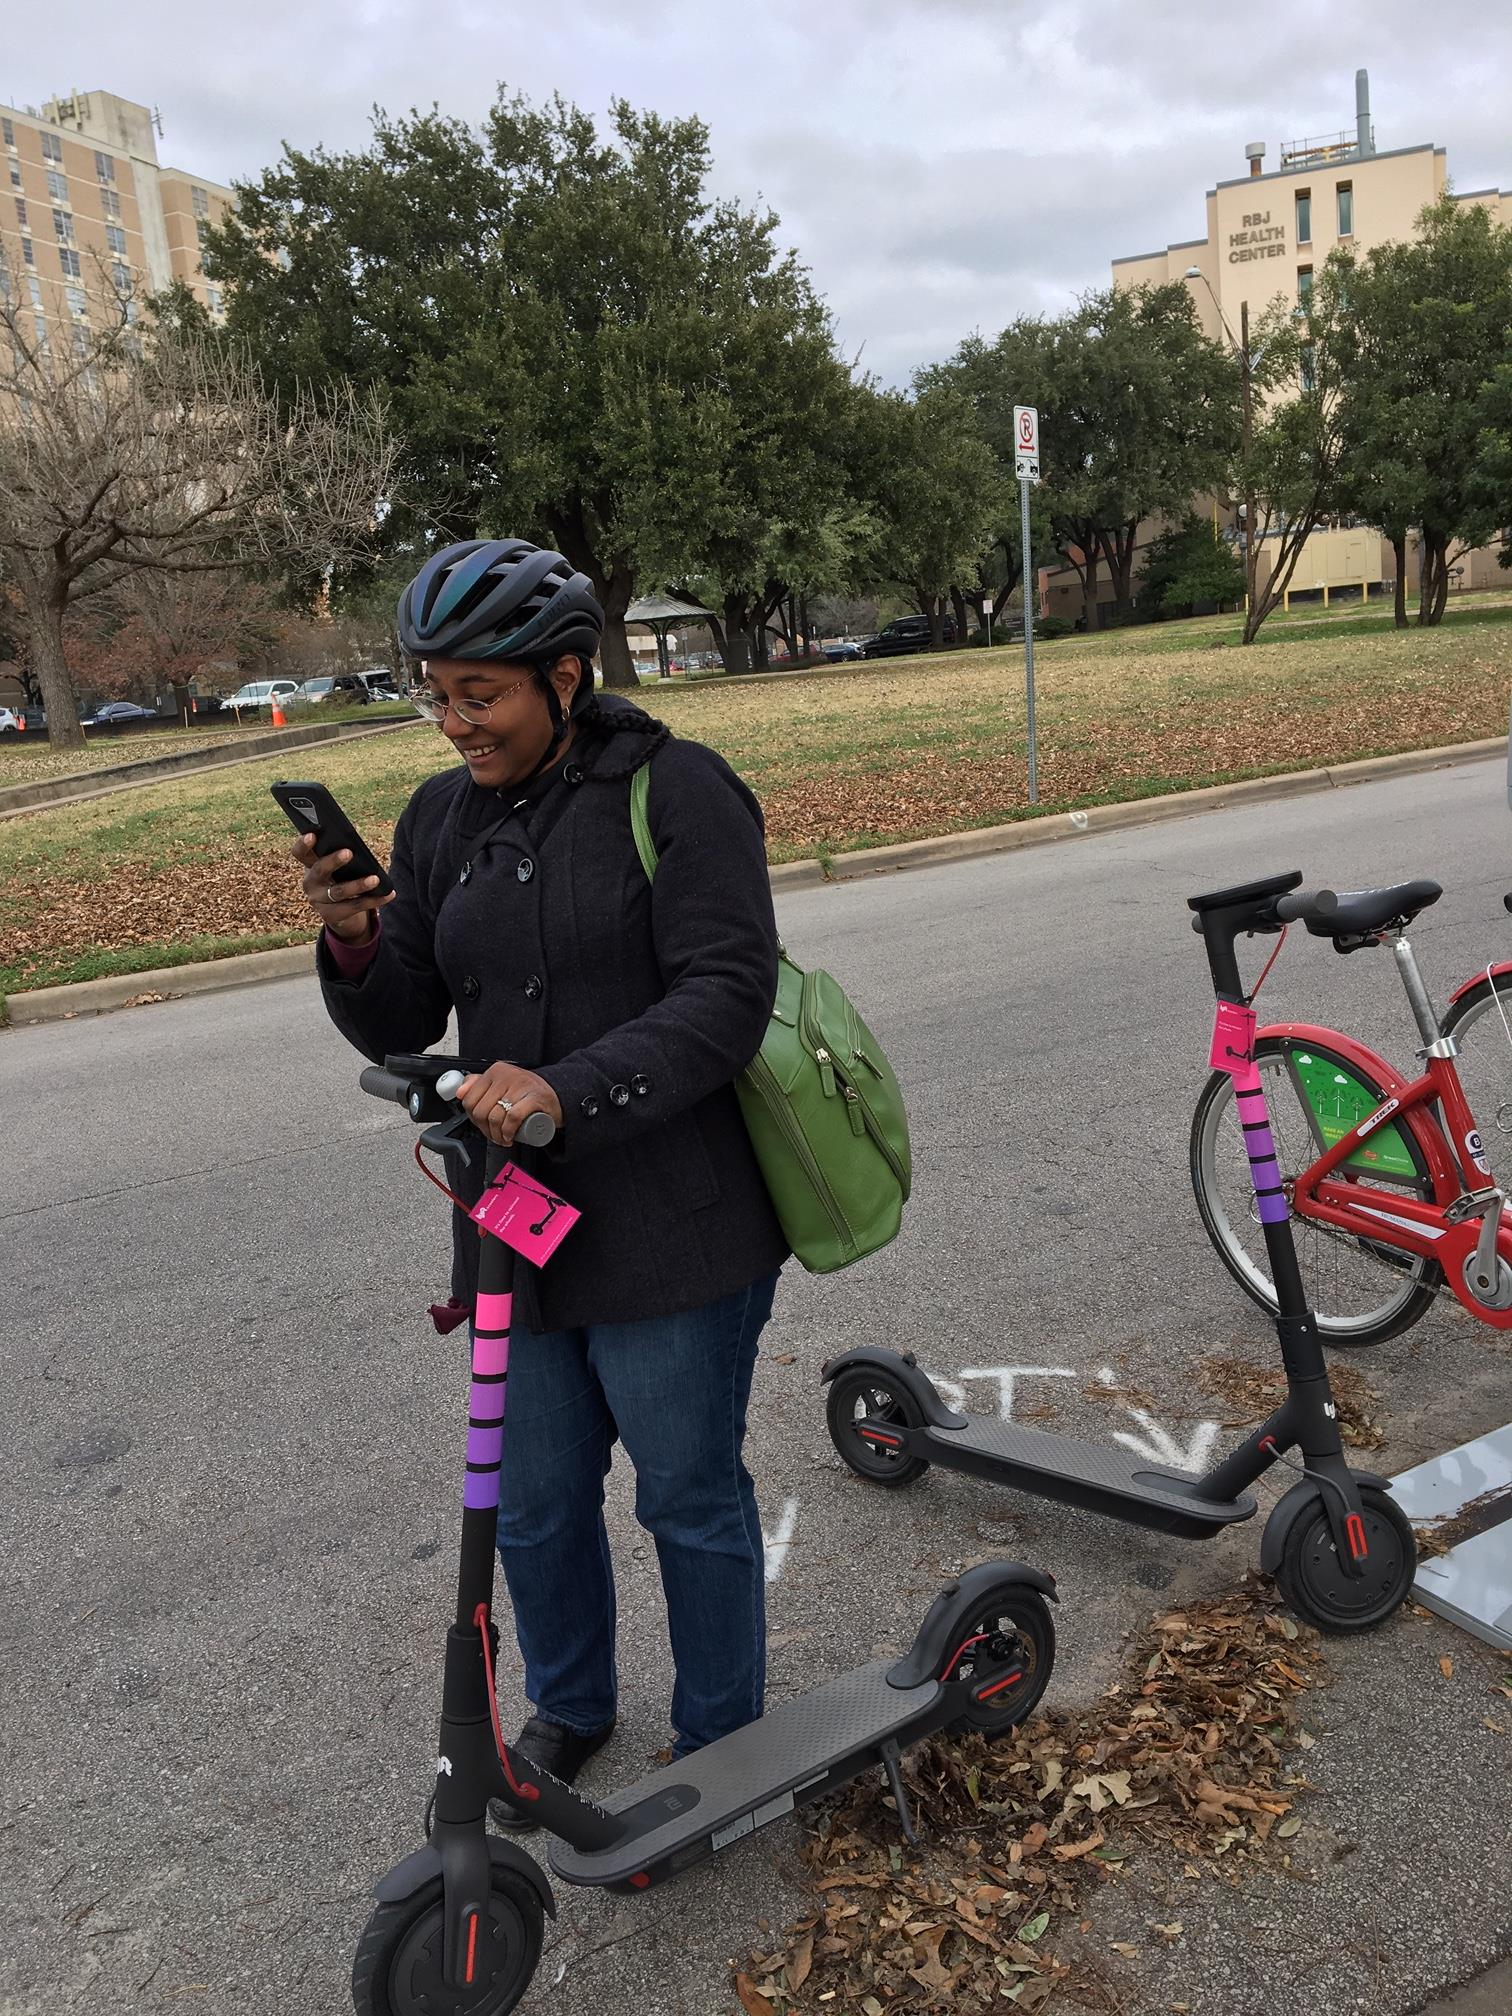 EIS officer tests a dockless electric scooter